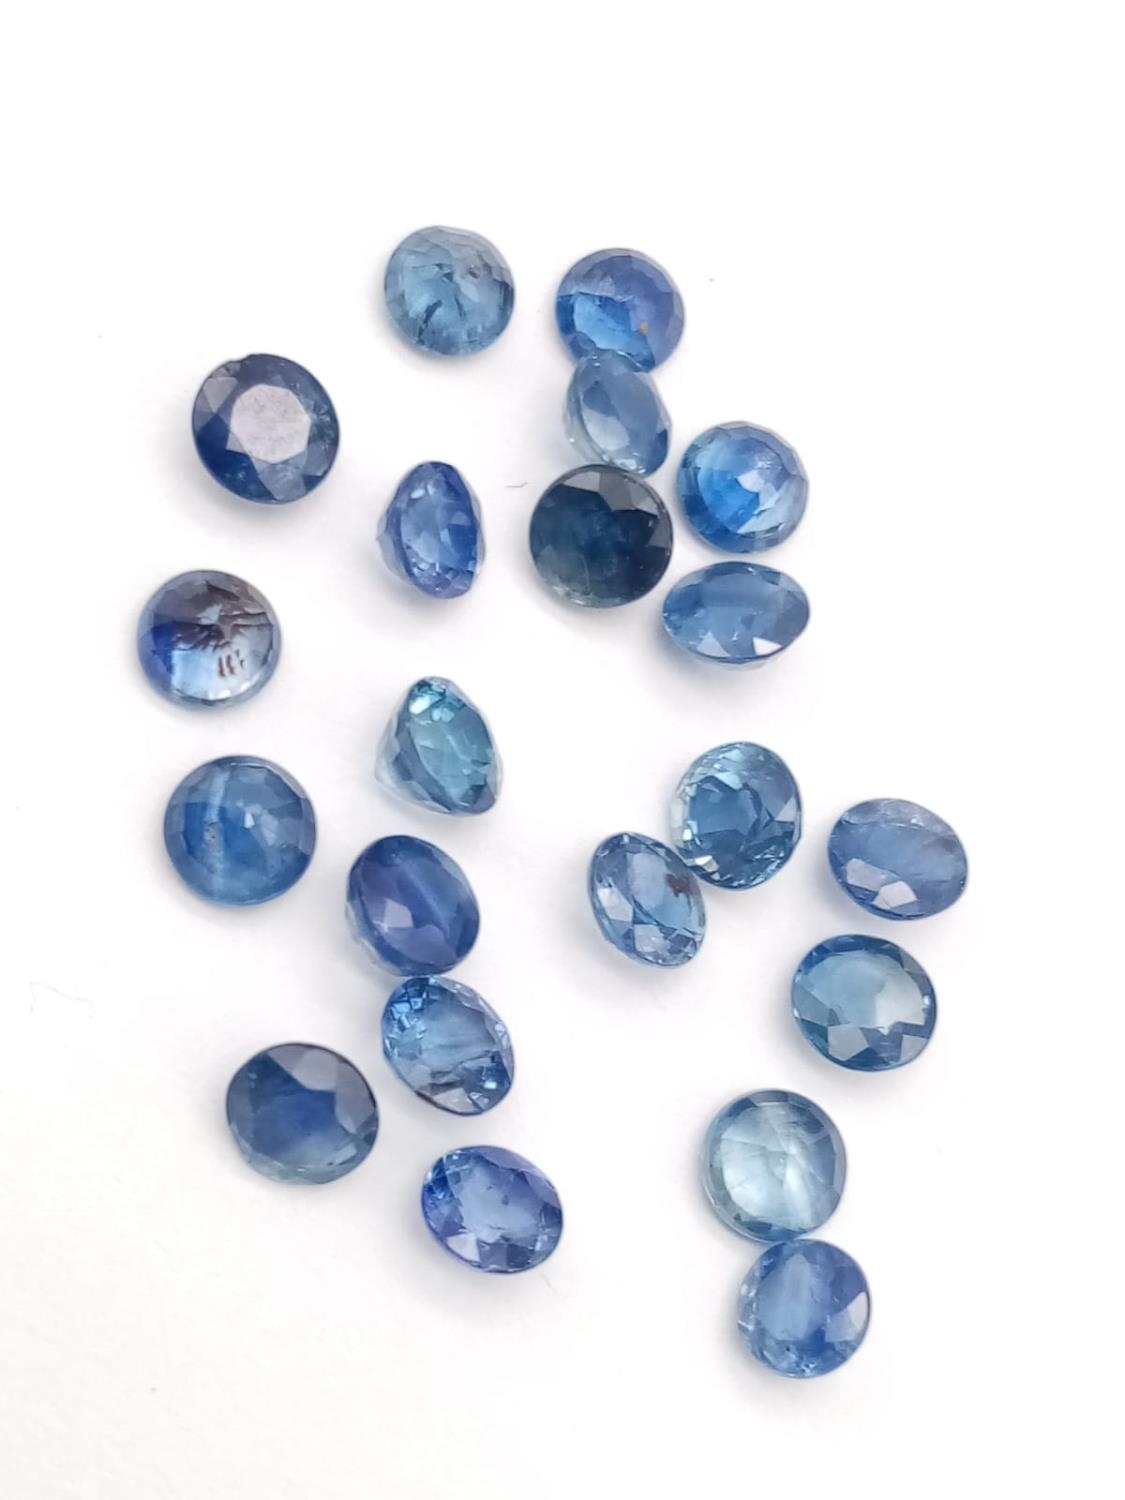 4.90ct loose blue sapphires - Image 2 of 3